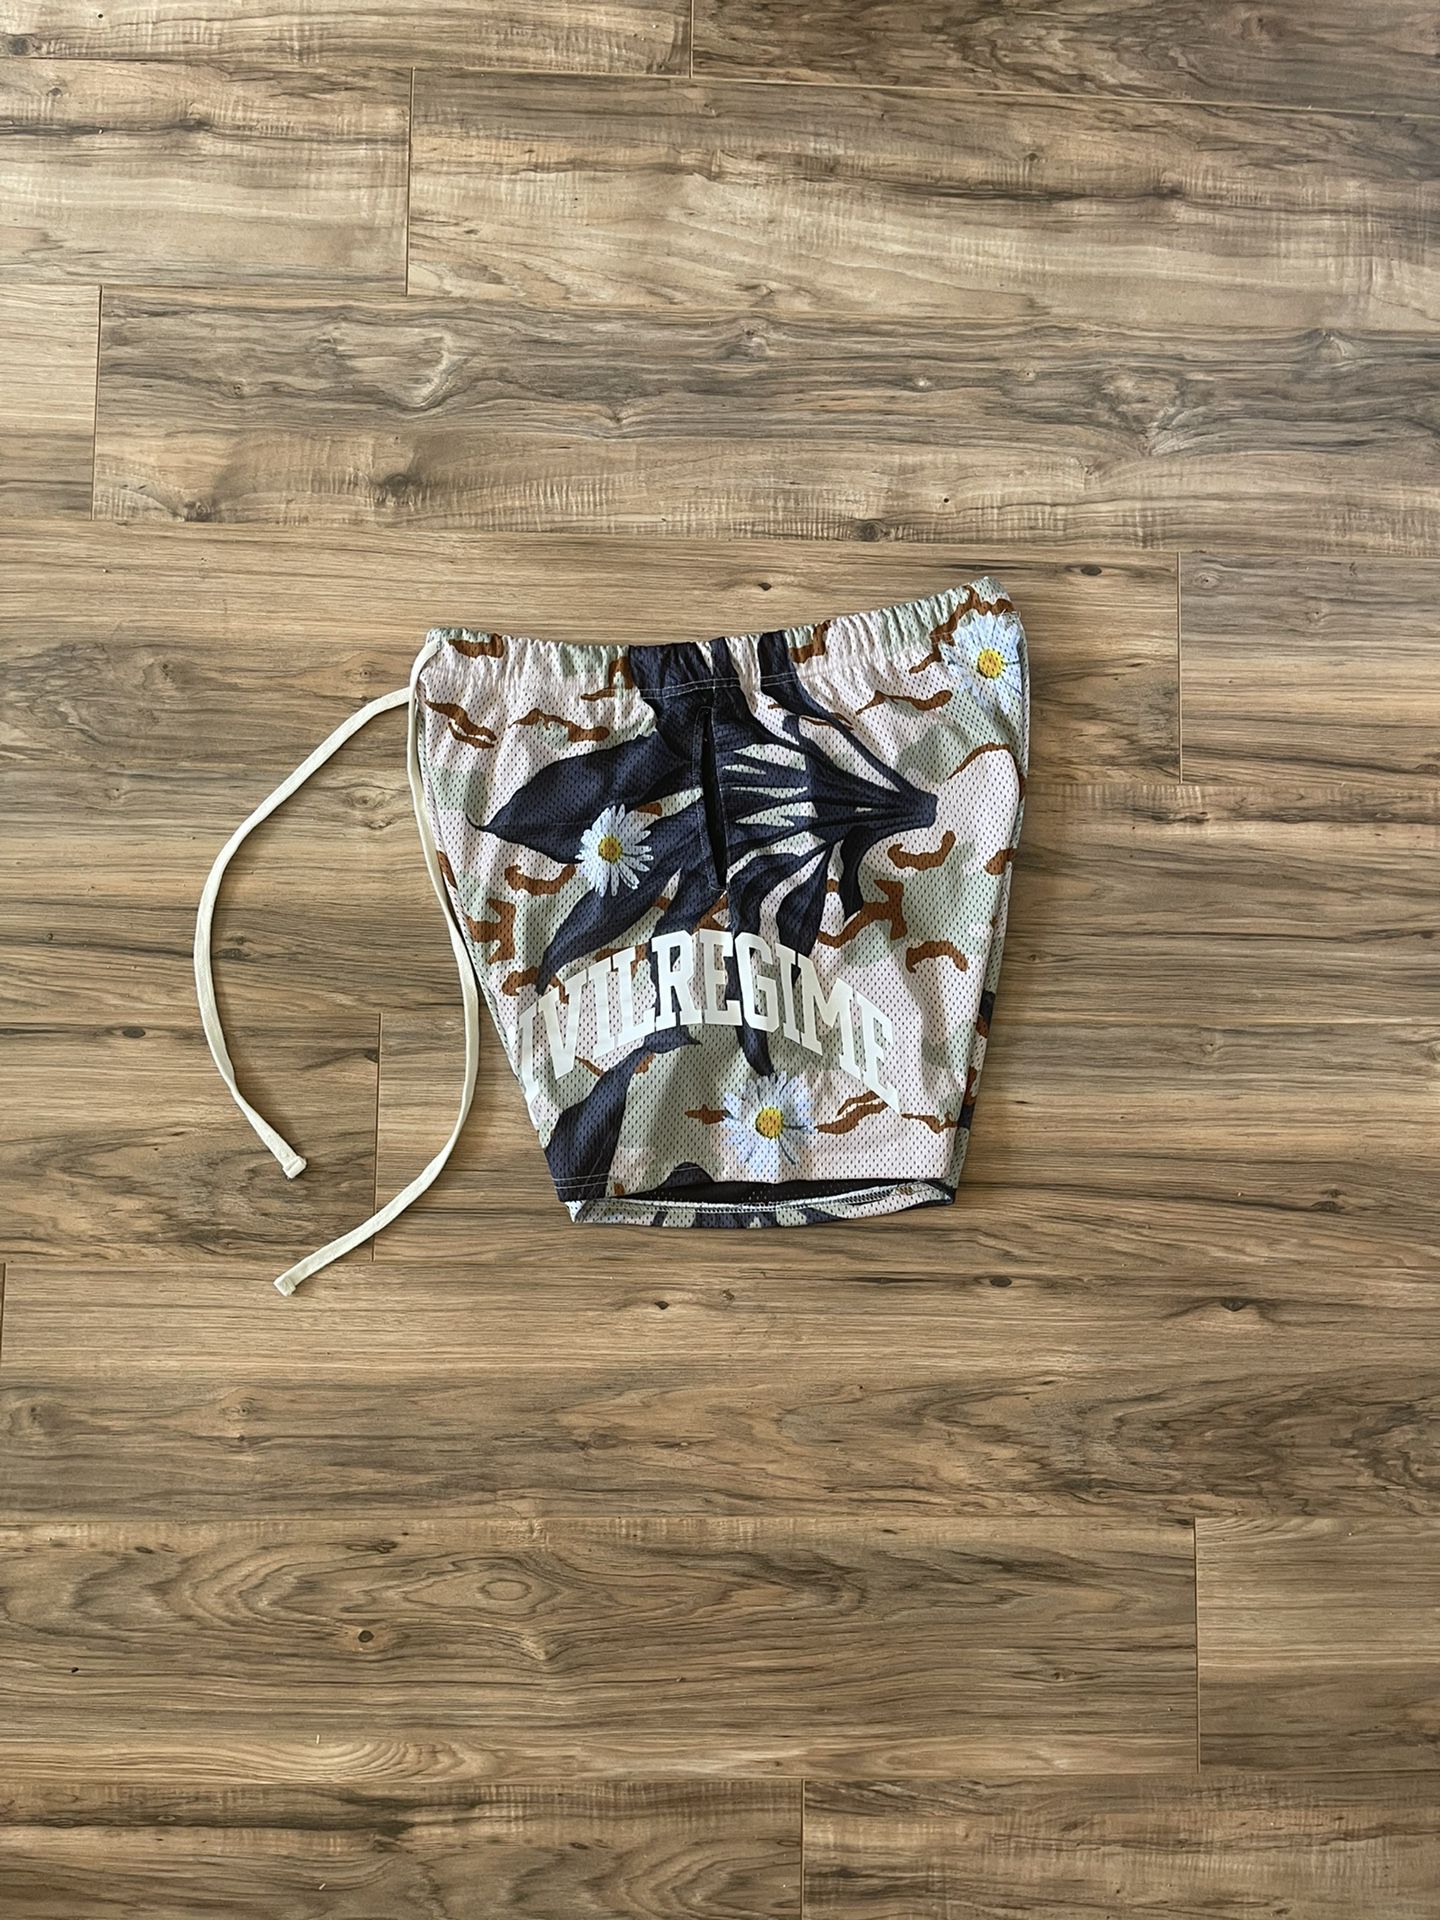 LV Mesh Shorts for Sale in Fresno, CA - OfferUp